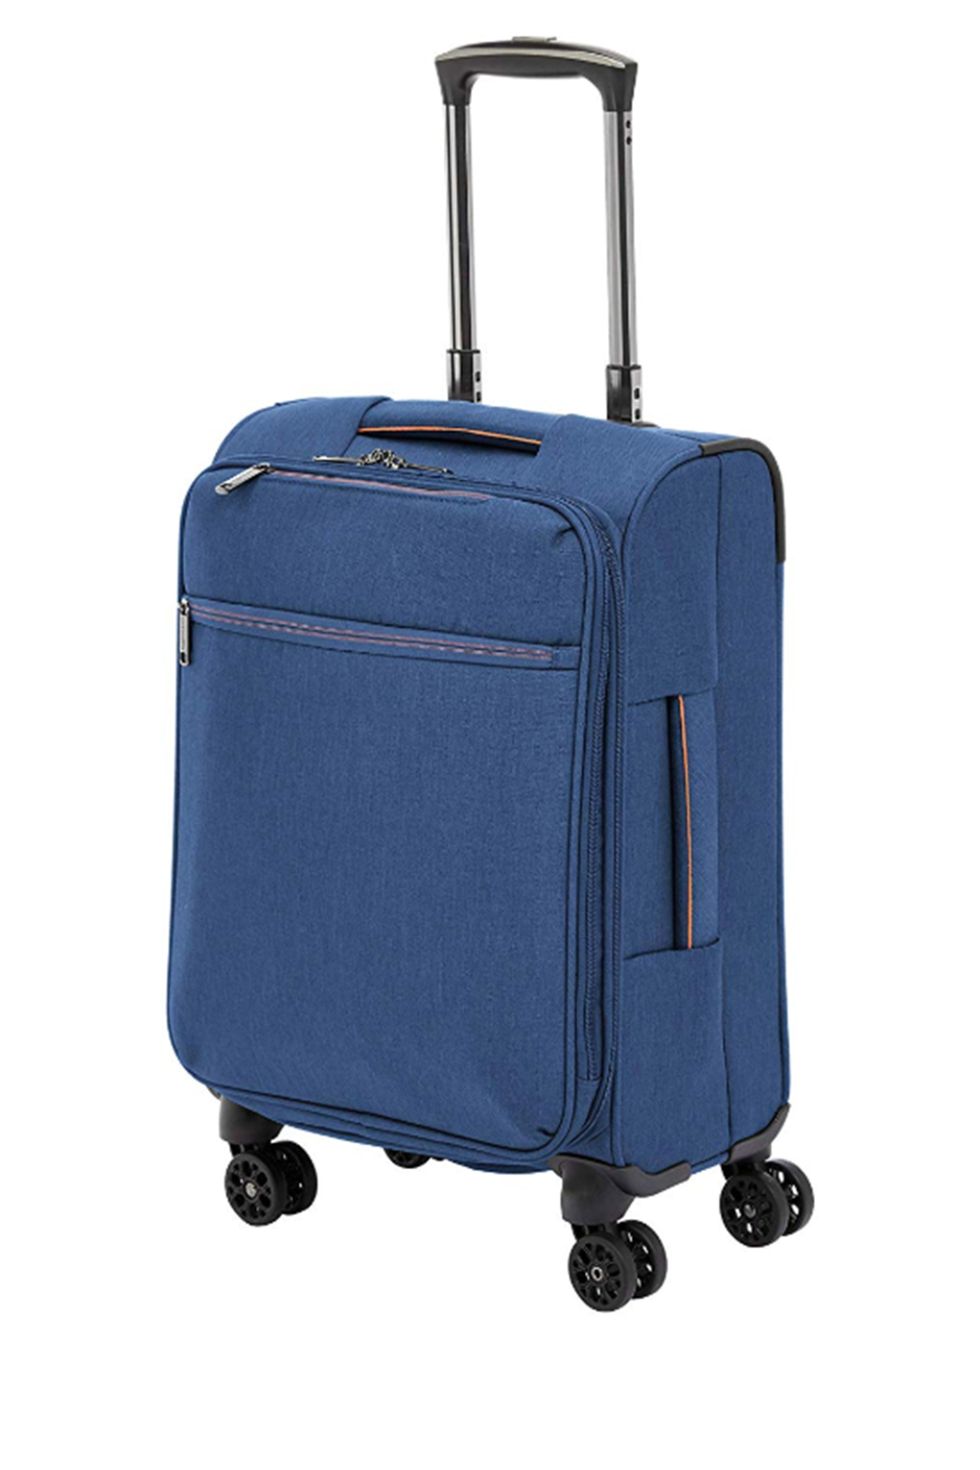 13 Best Luggage Brands 2023 - Top Suitcases for Travel